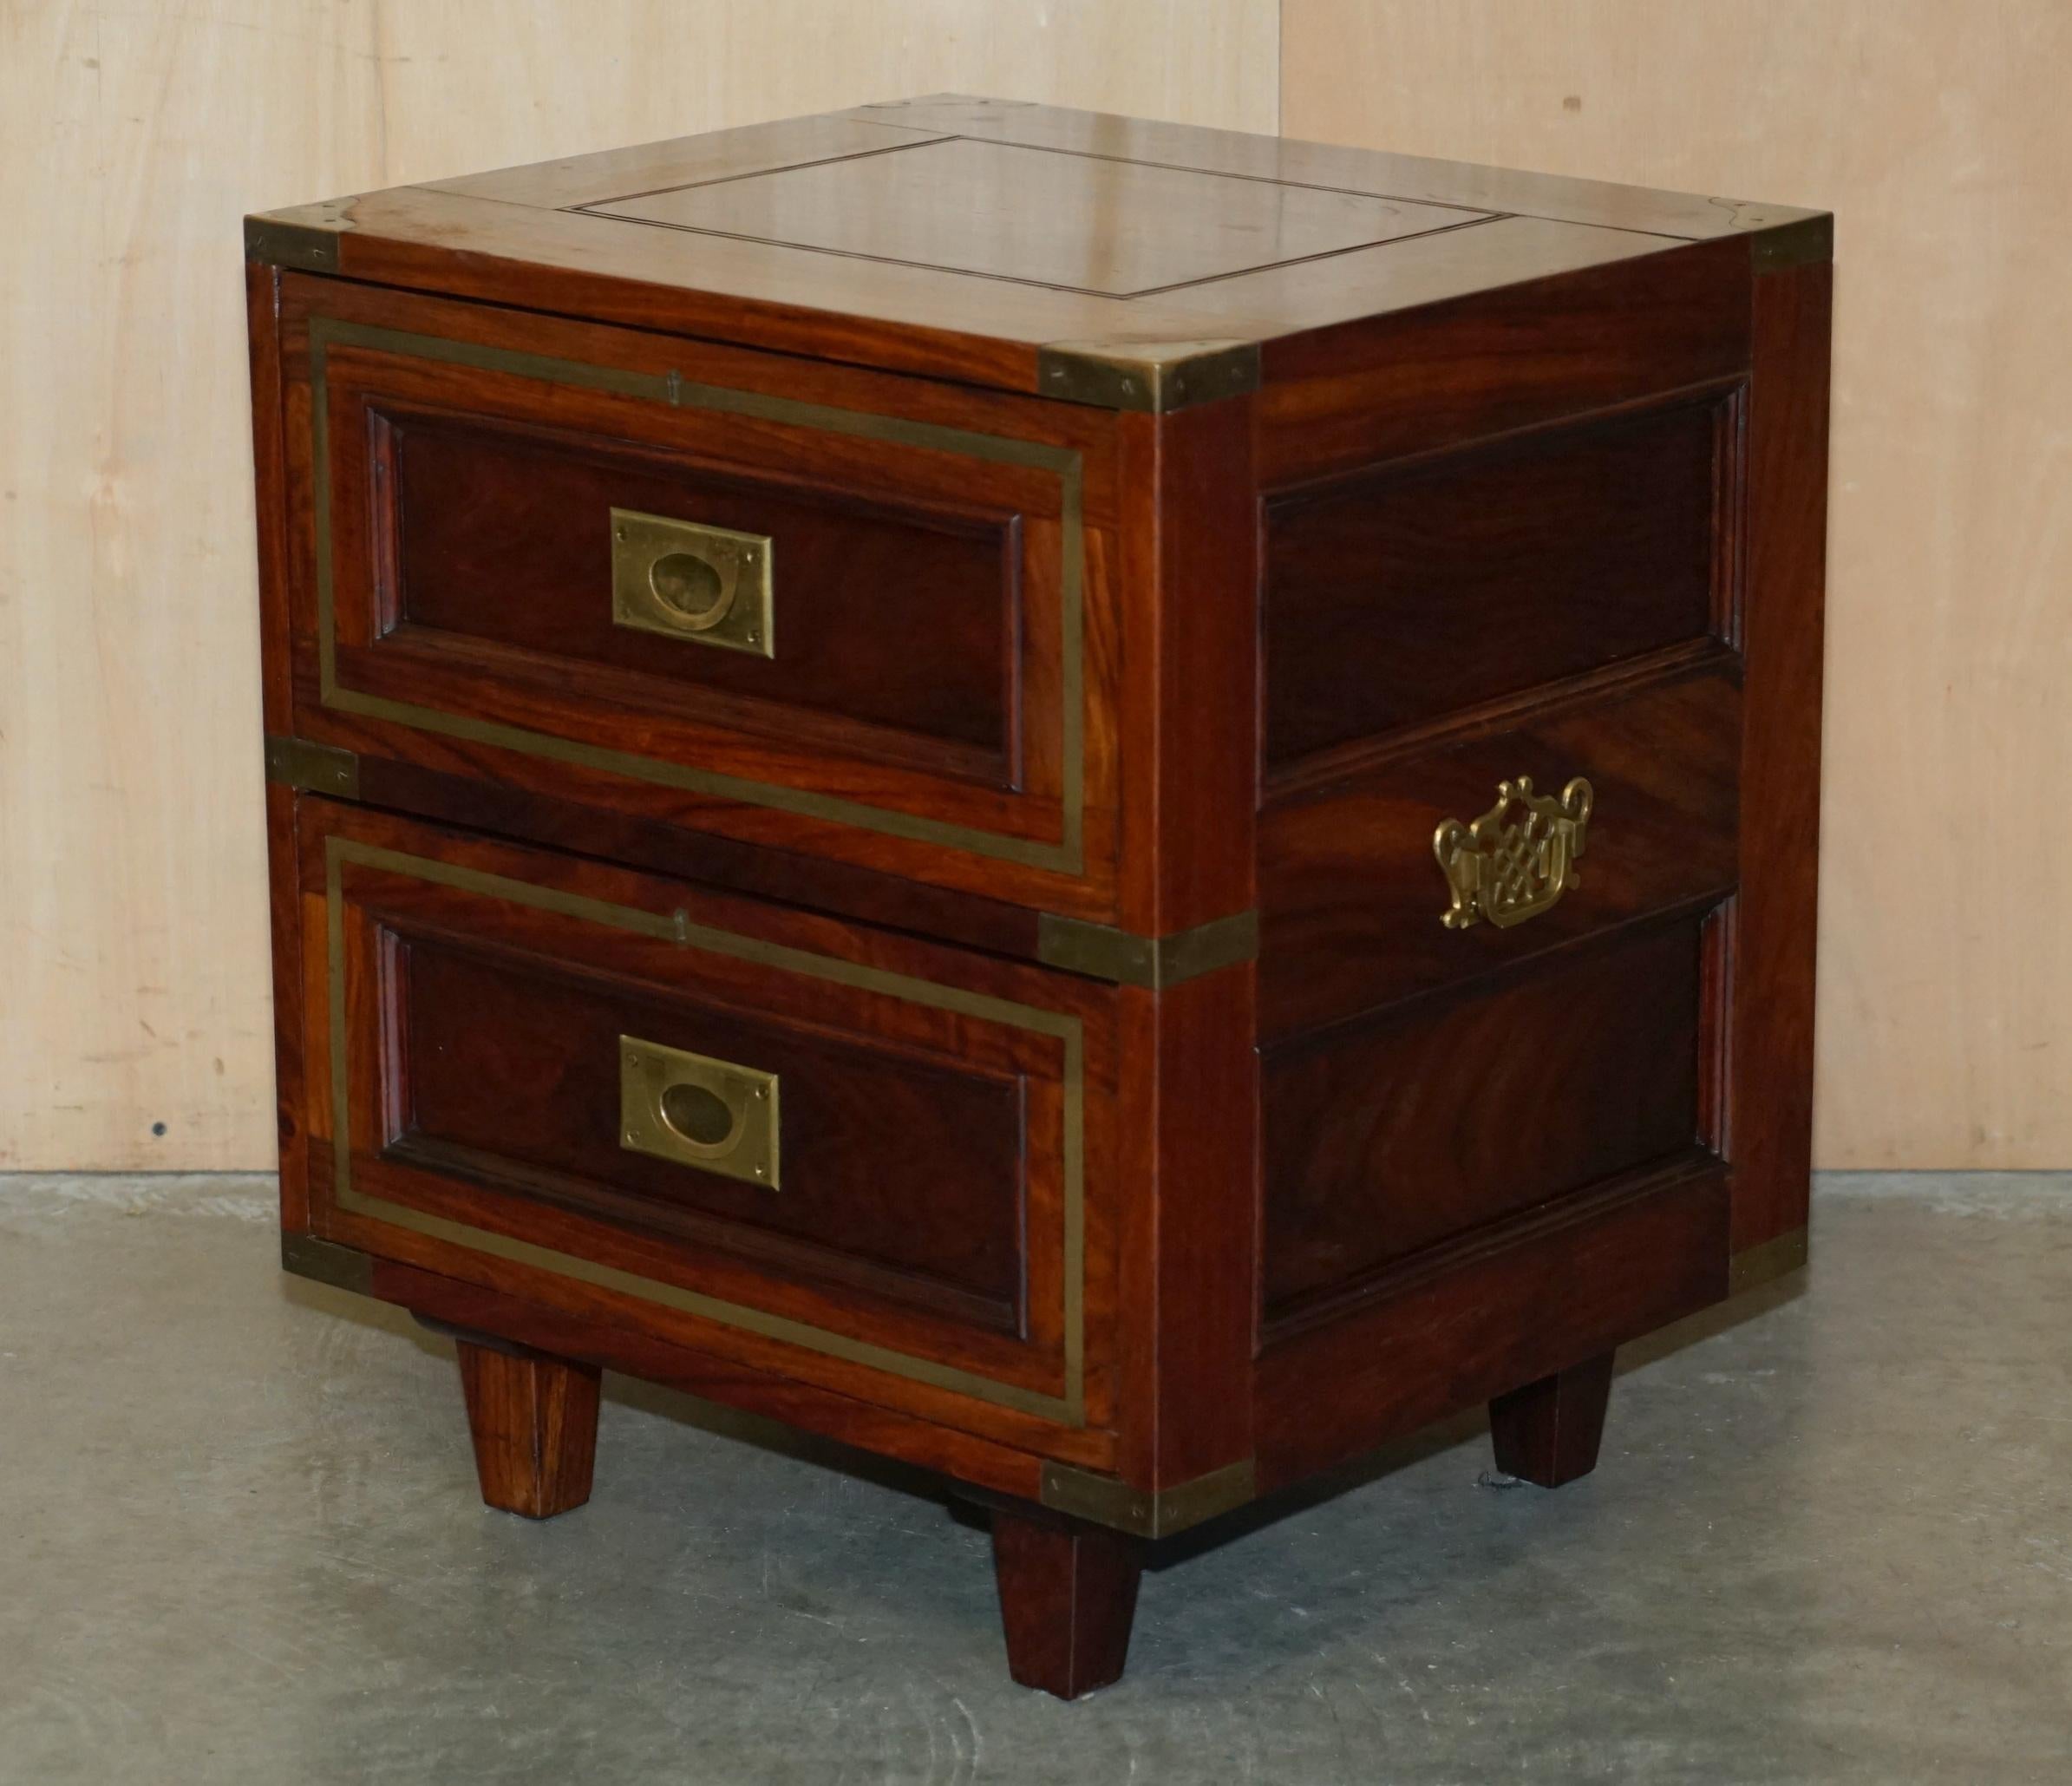 Royal House Antiques

Royal House Antiques is delighted to offer for sale this sublime pair antique circa 1920's Brass and Camphor wood bedside or side tables in the military campaign style 

Please note the delivery fee listed is just a guide, it